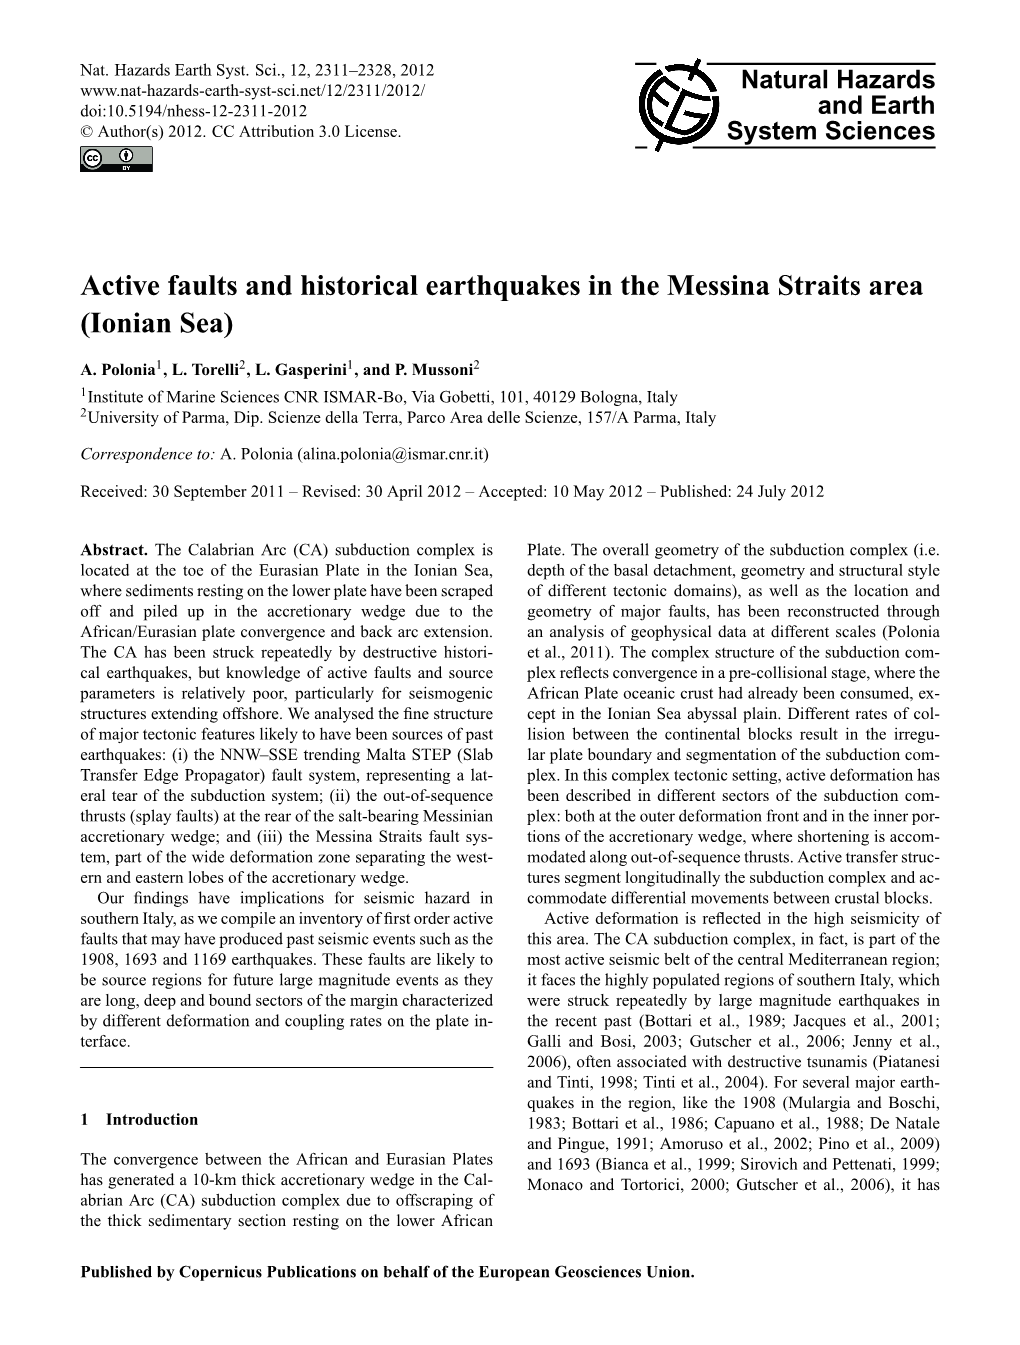 Active Faults and Historical Earthquakes in the Messina Straits Area (Ionian Sea)